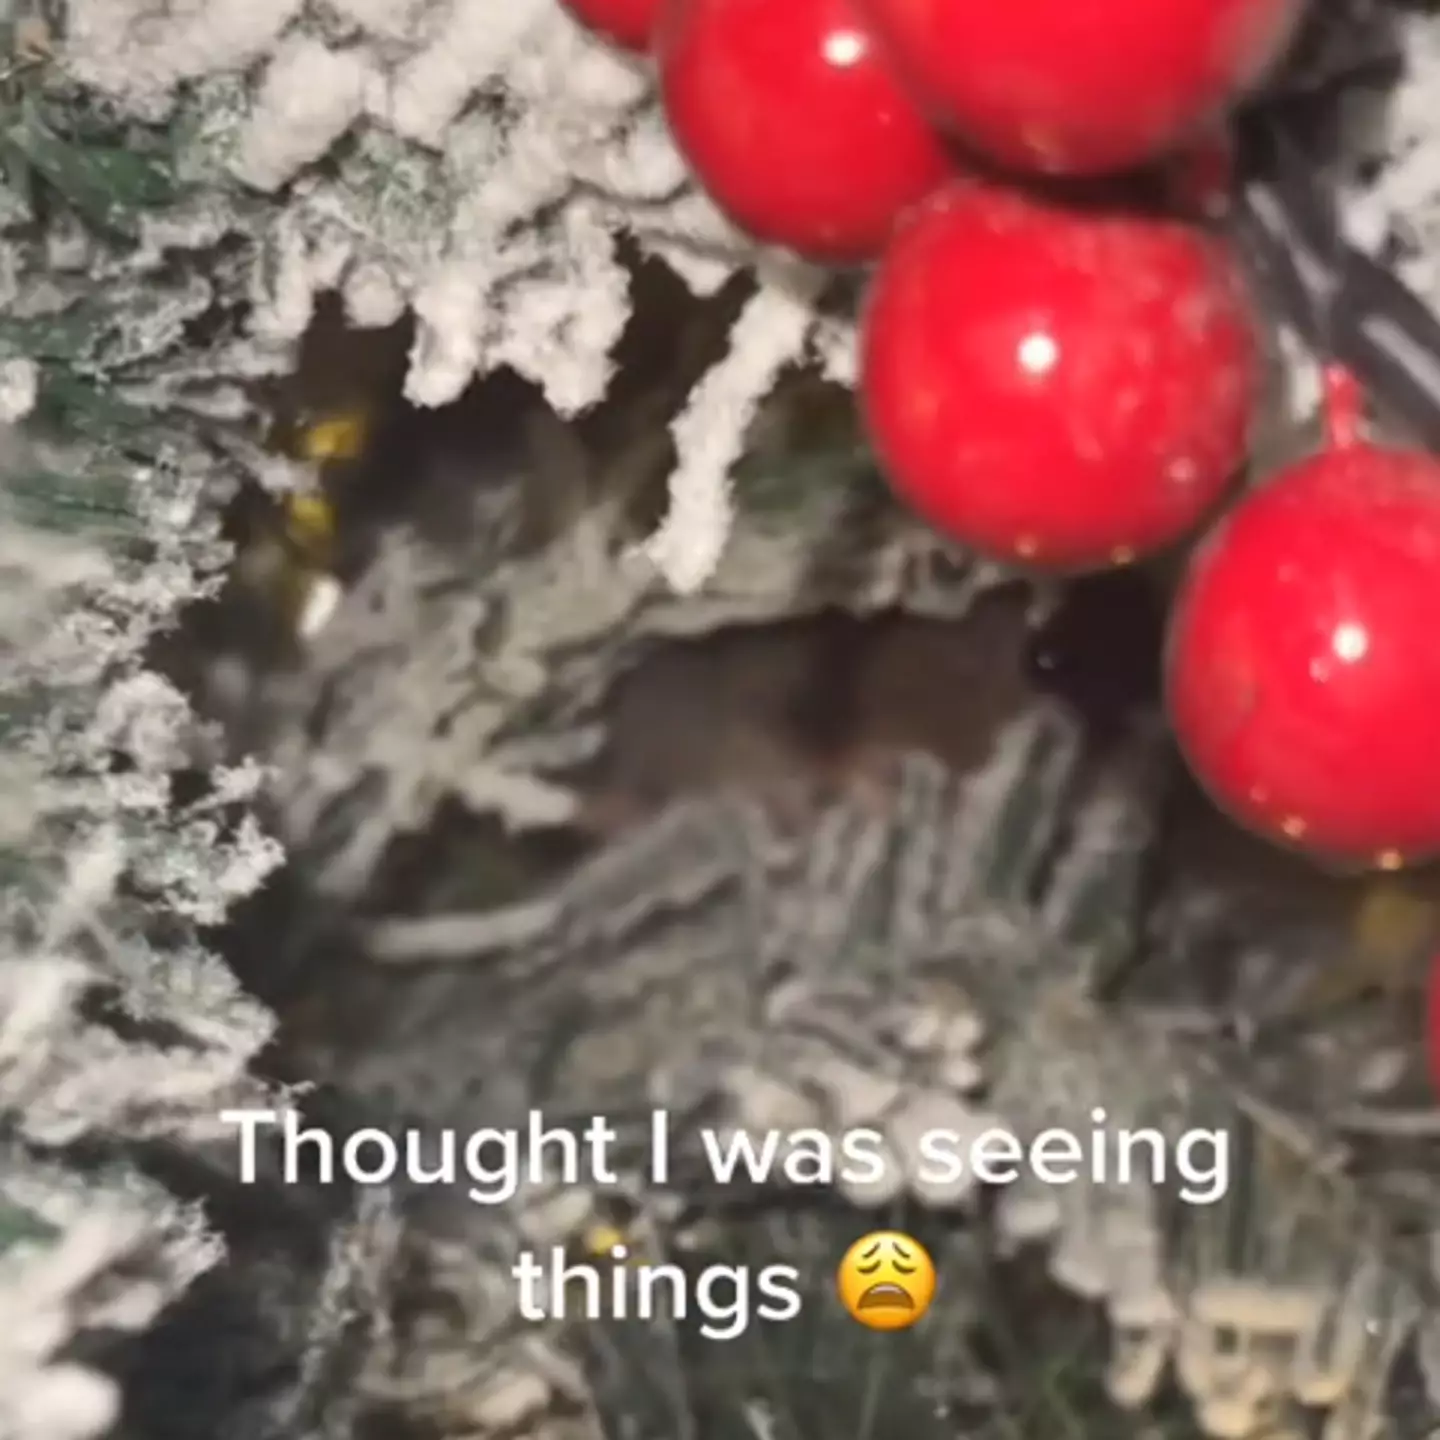 The woman was shocked to find a mouse in her Christmas tree.